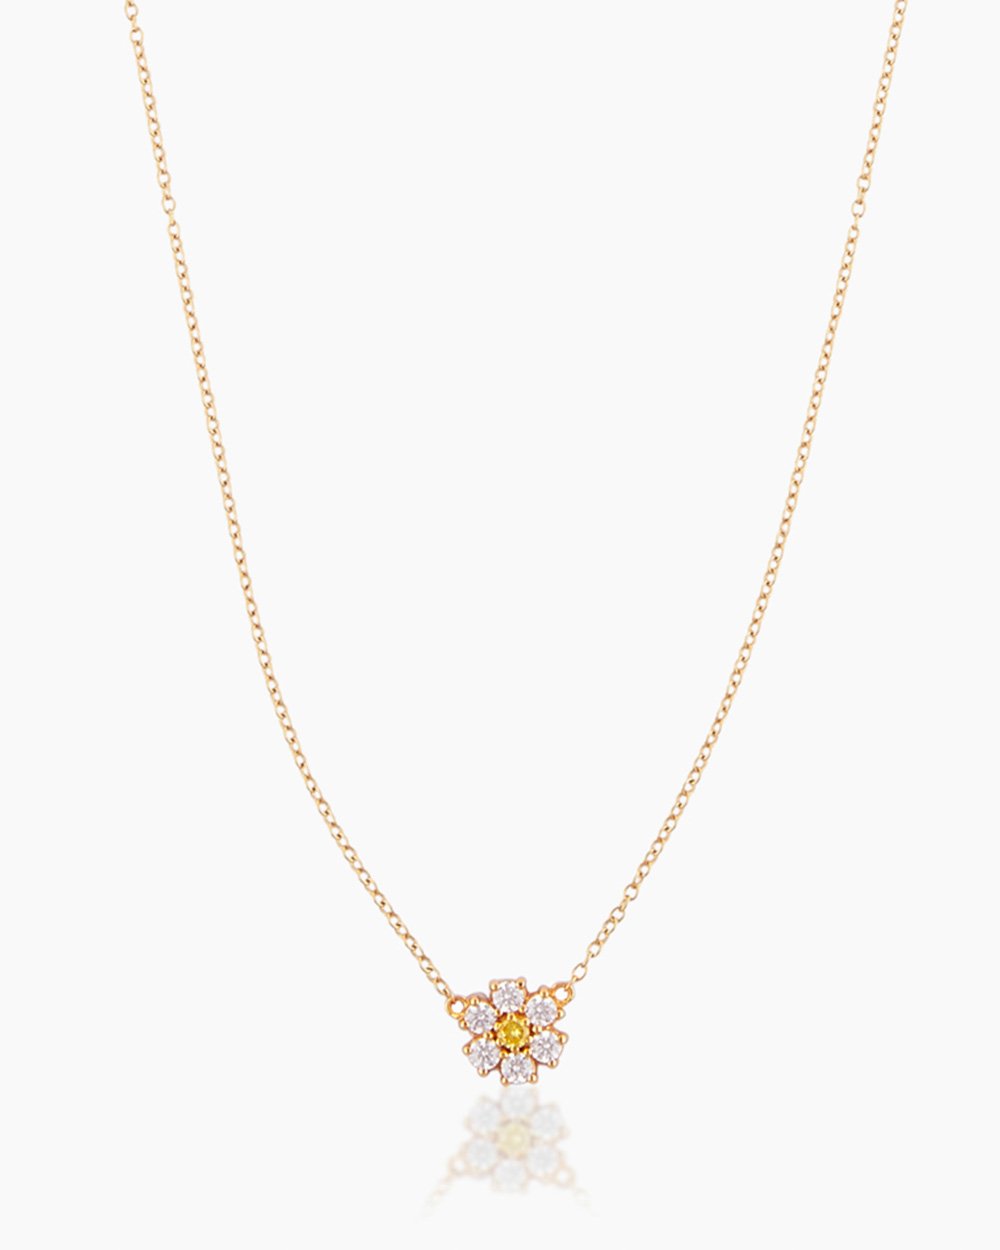 The Flora, a gold pendant necklace featuring a daisy-like flower crafted with cubic zirconia